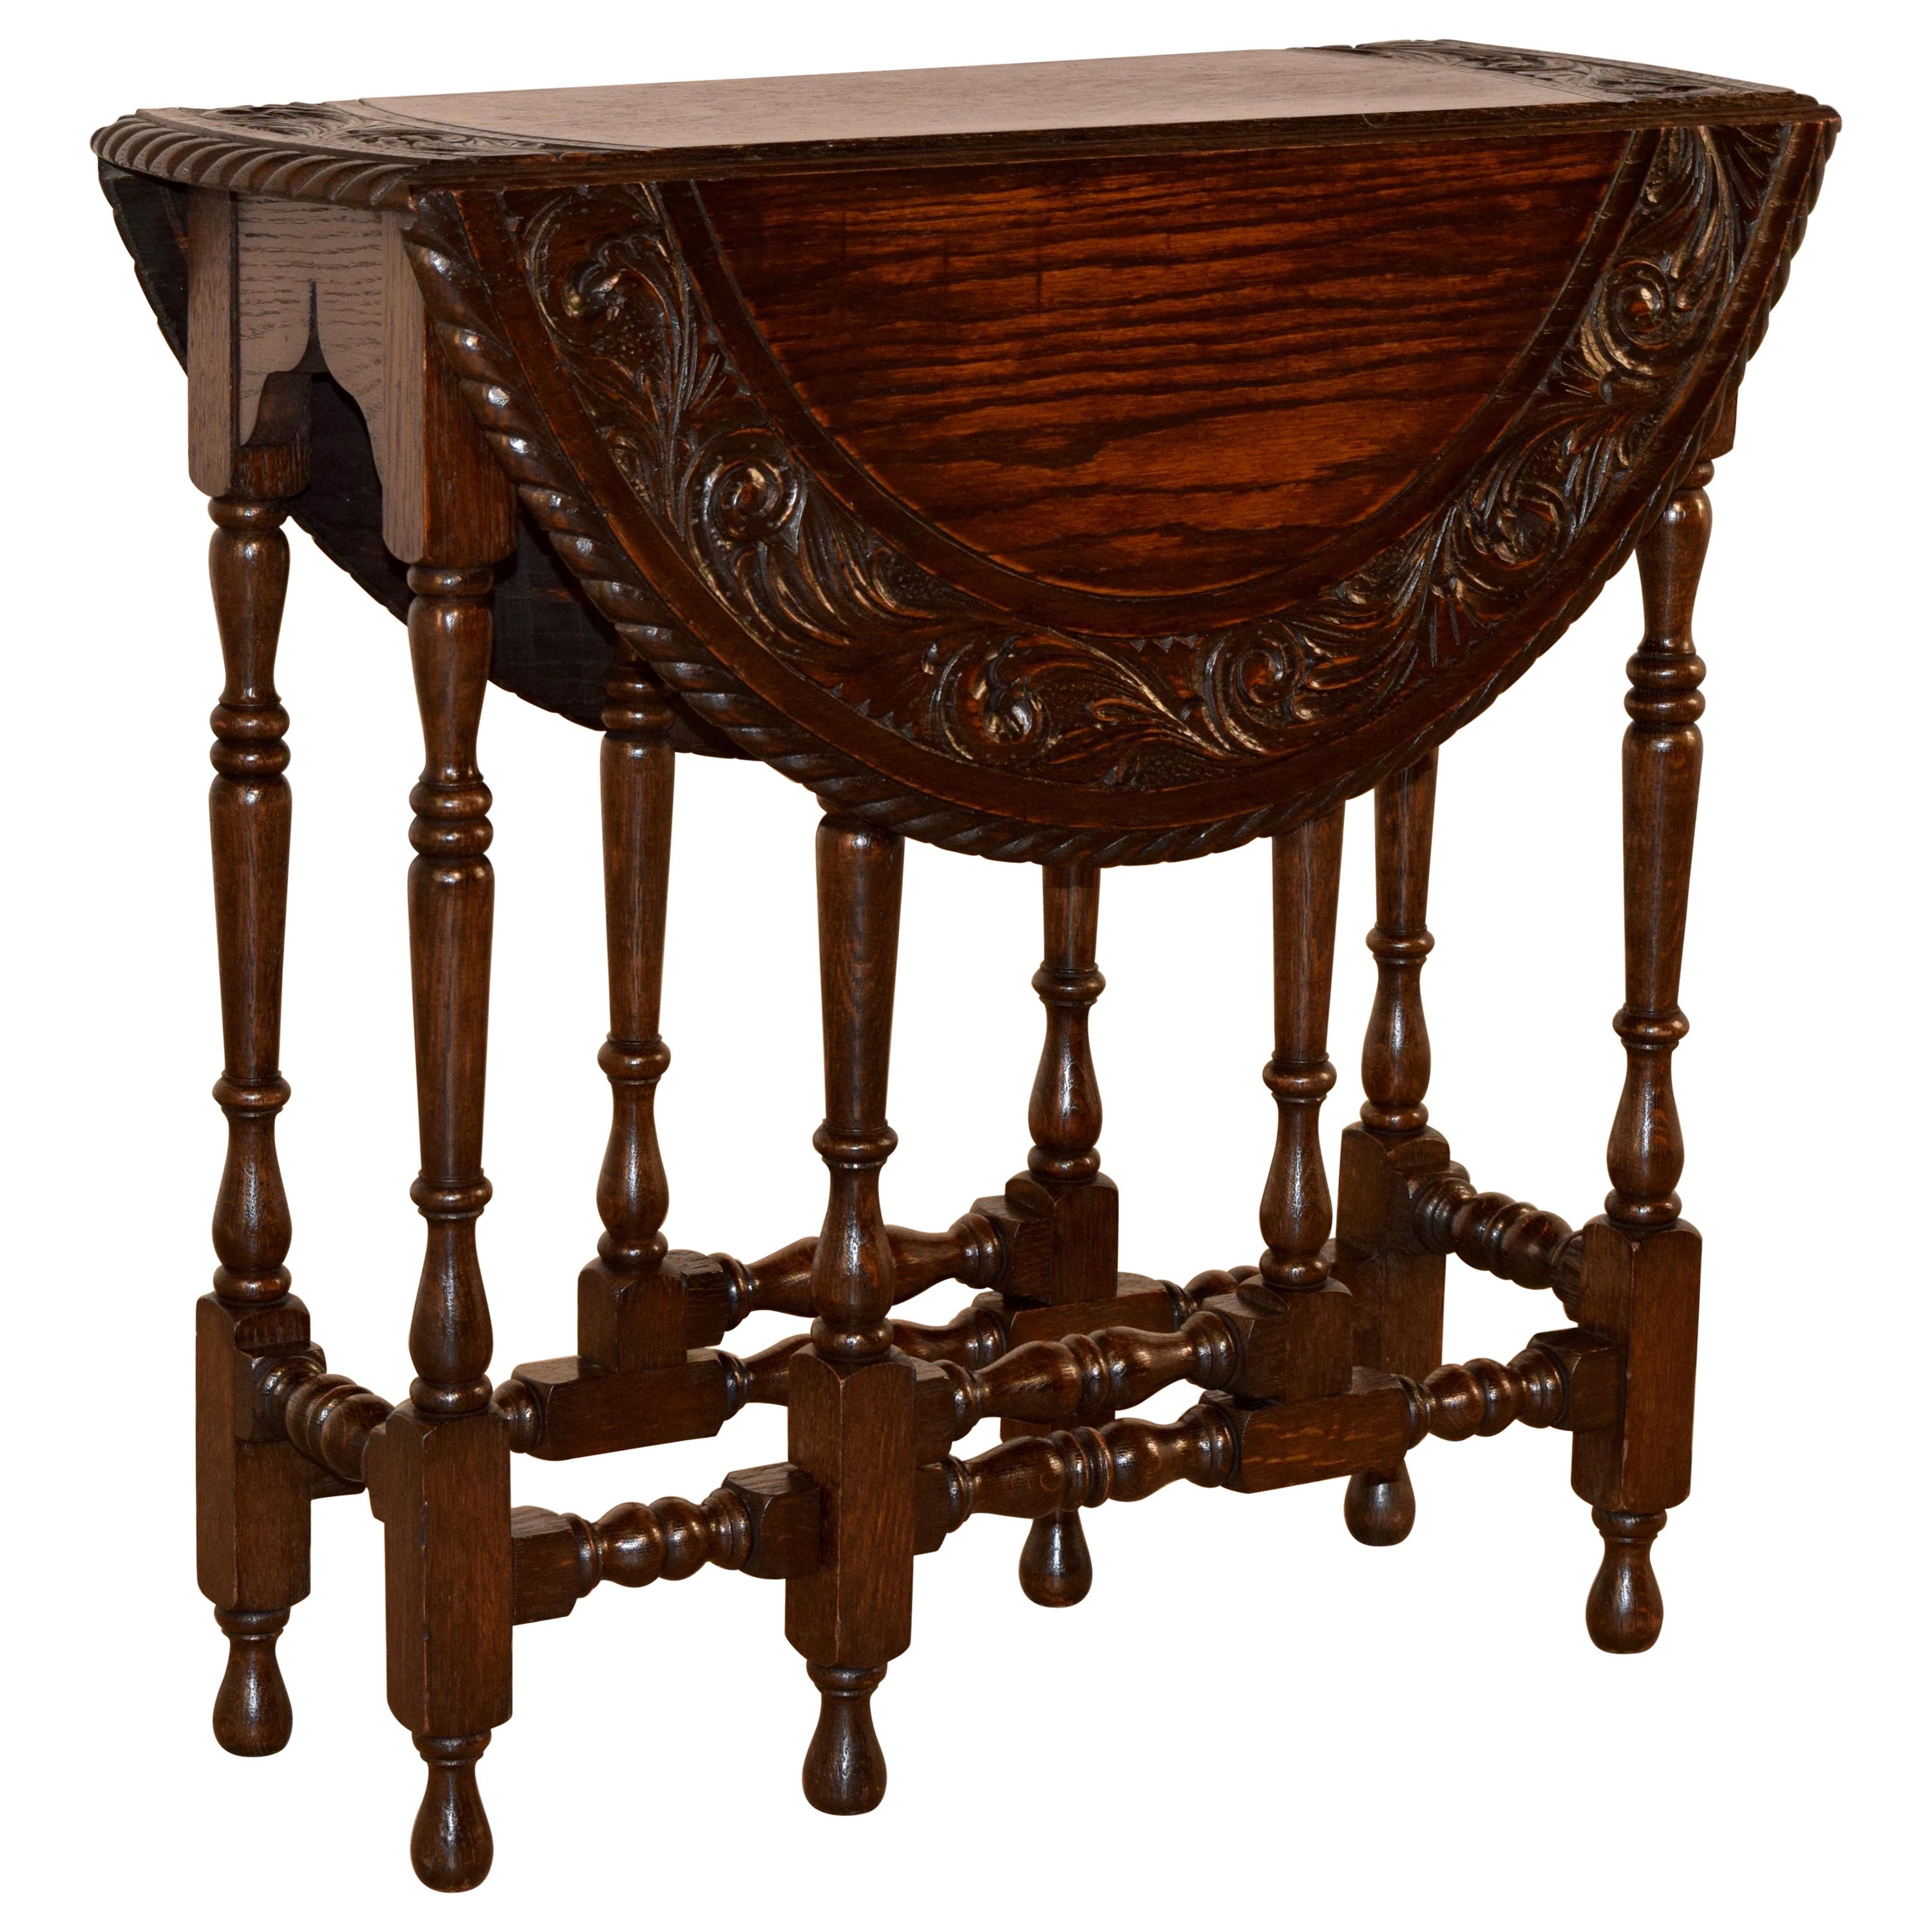 19th Century English Oak Carved Gate-Leg Table For Sale